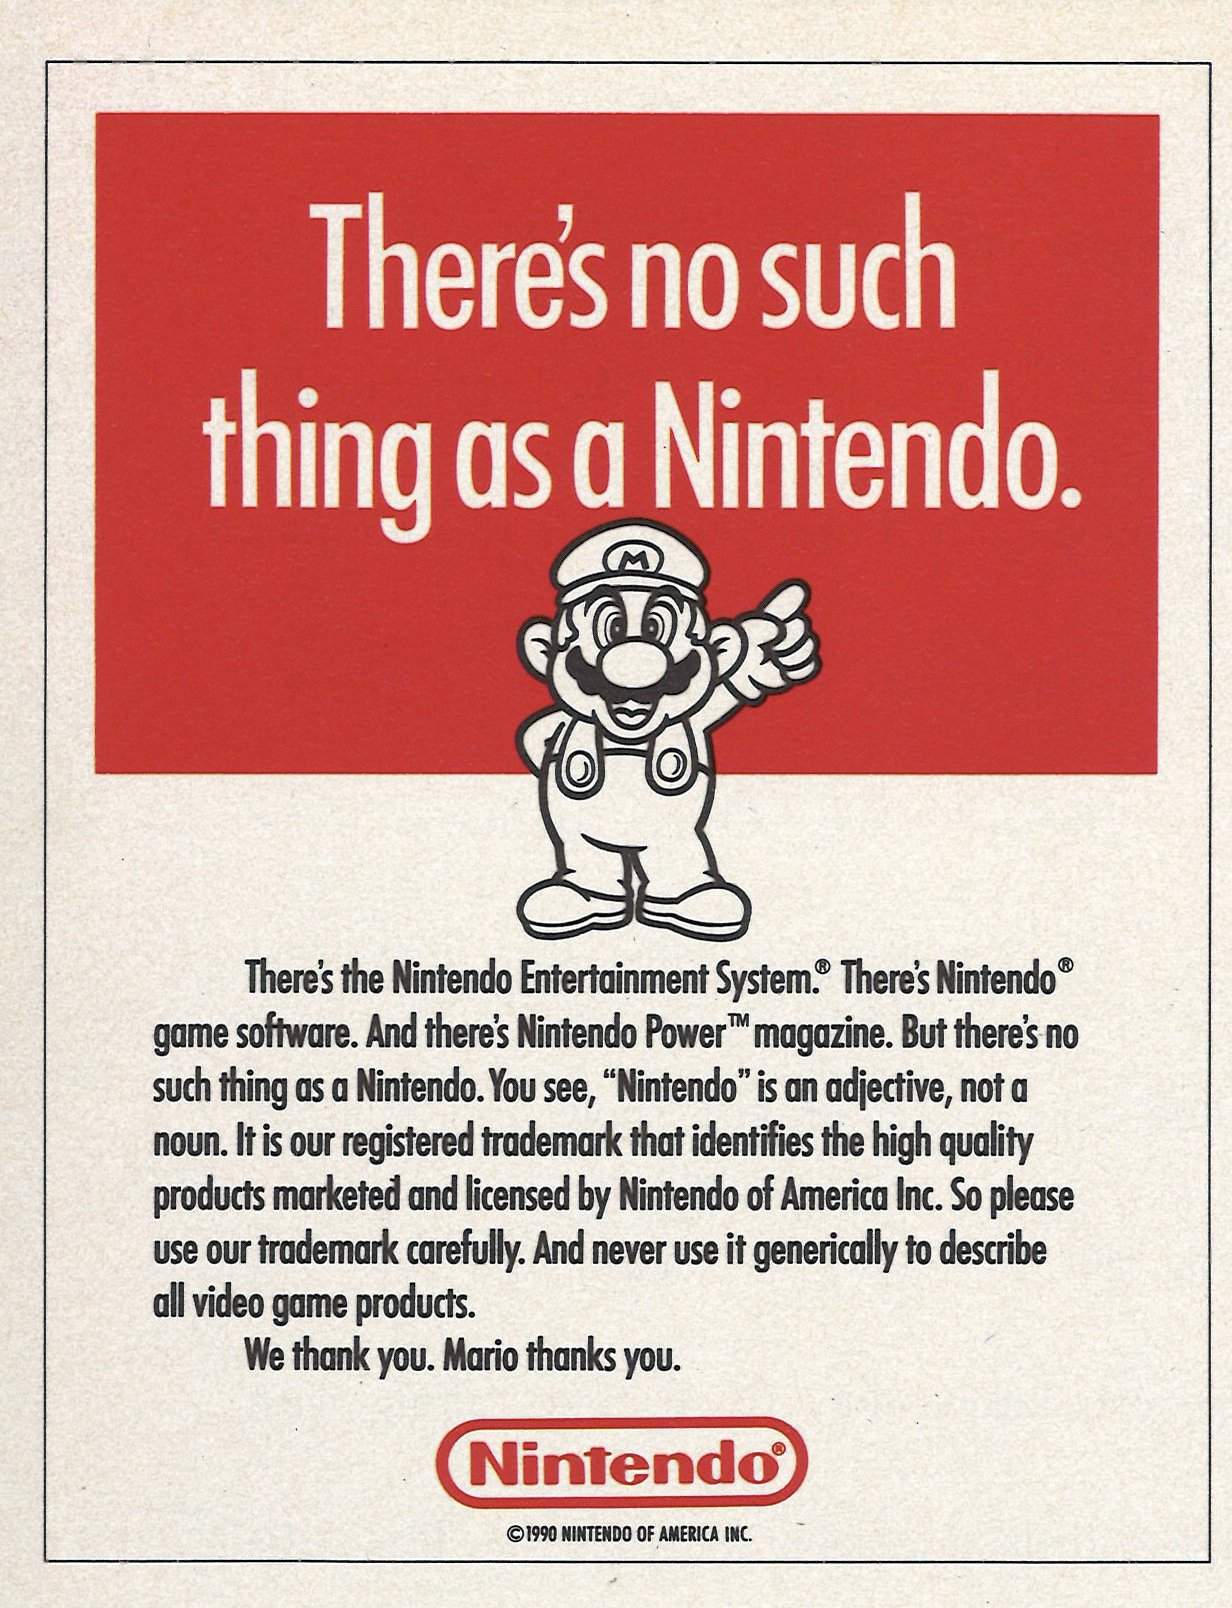 There's no such thing as a Nintendo Poster from 1990